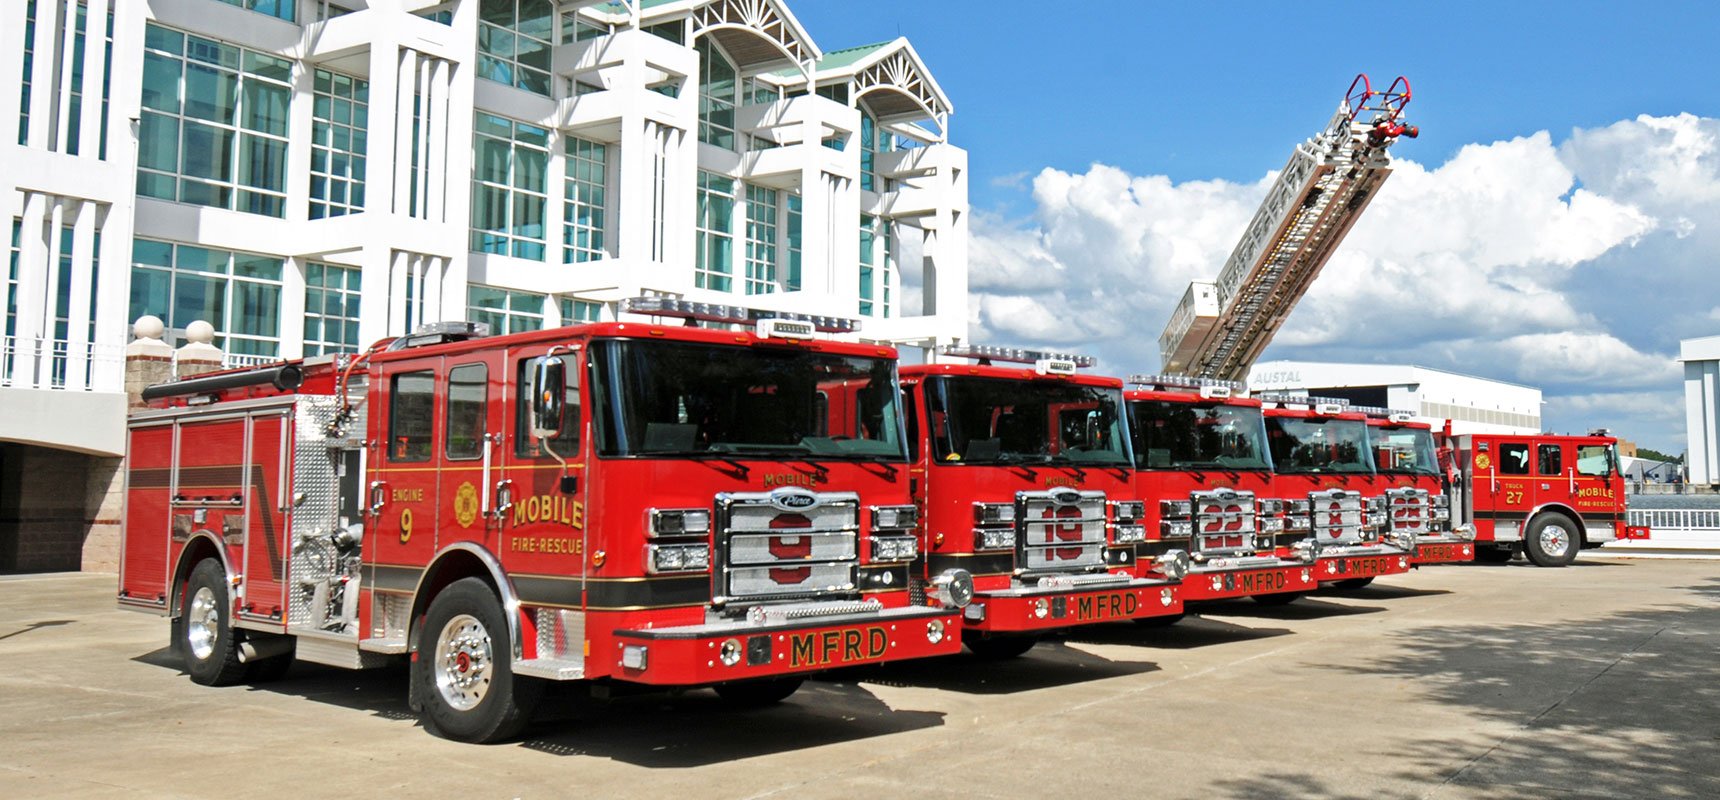 Pierce-Delivers-Five-Enforcer-Pumpers-and-an-Ascendant-107-Aerial-Ladder-to-the-City-of-Mobile-Alabama---Header